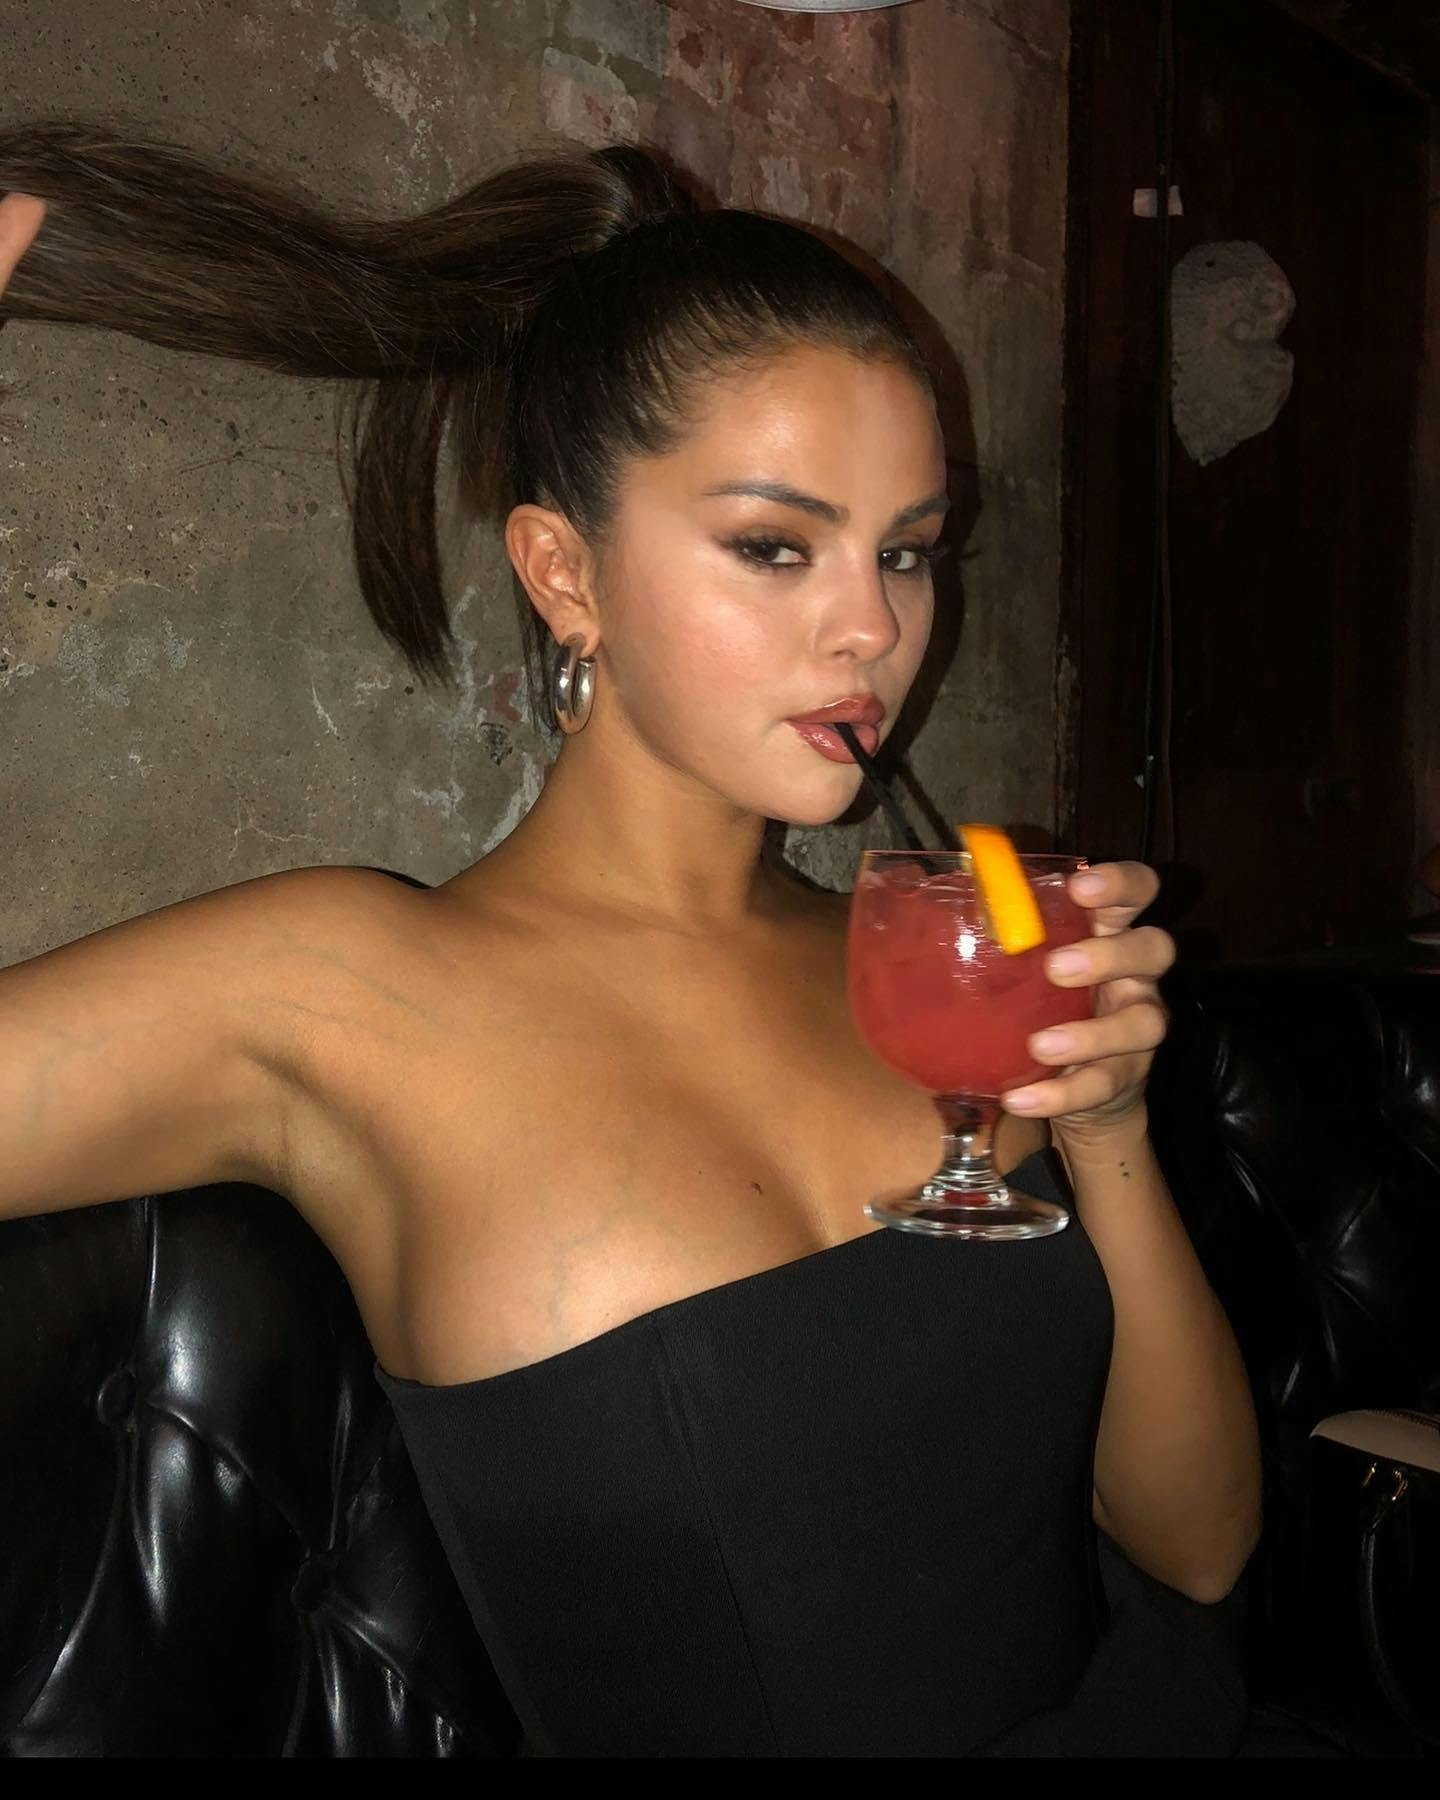 Woman in black dress sipping on a pink drink.